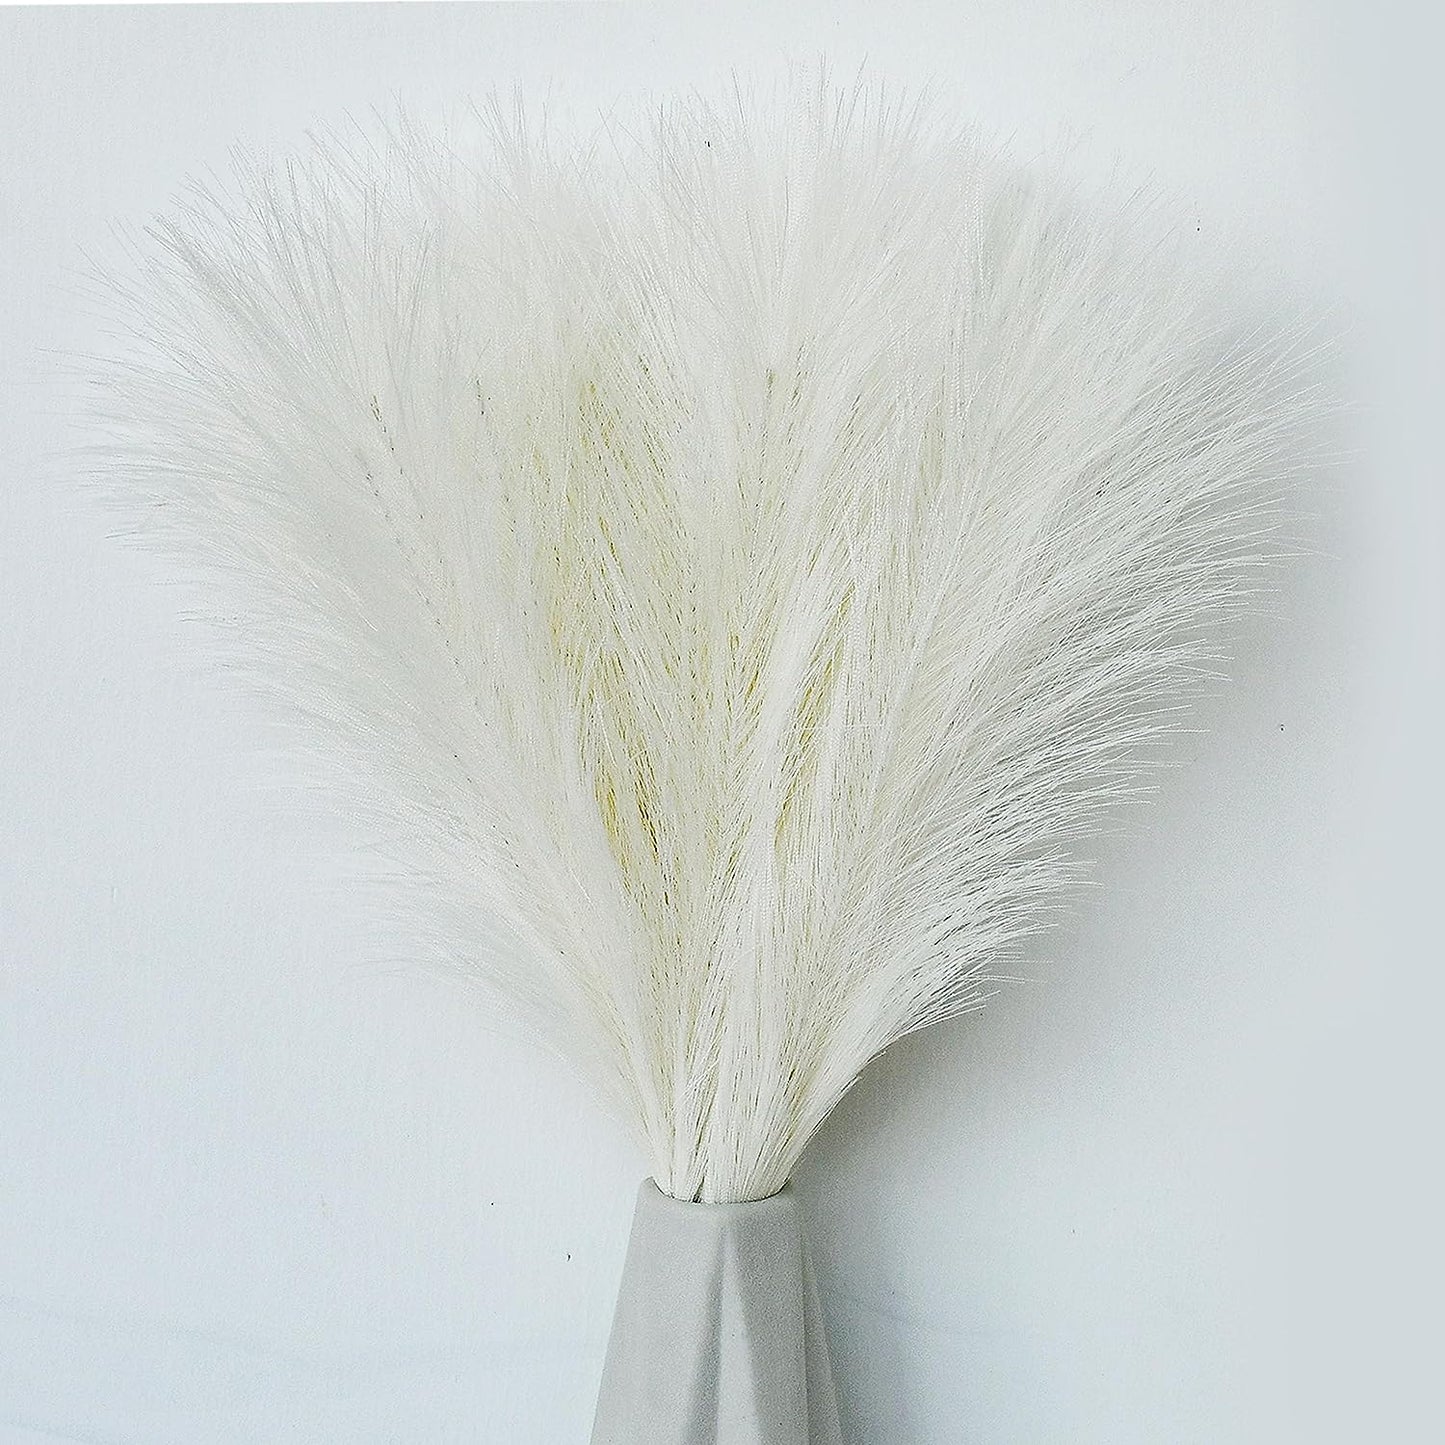 HomeXO Pampas Grass 3 PCS 17" Small Boho Home Decor Fake Pompas Floral Branches Fluffy Artificial Pompous Grass for Floor Vase Filler Christmas Tree Wedding Bedroom Table Decoration (Creme White)